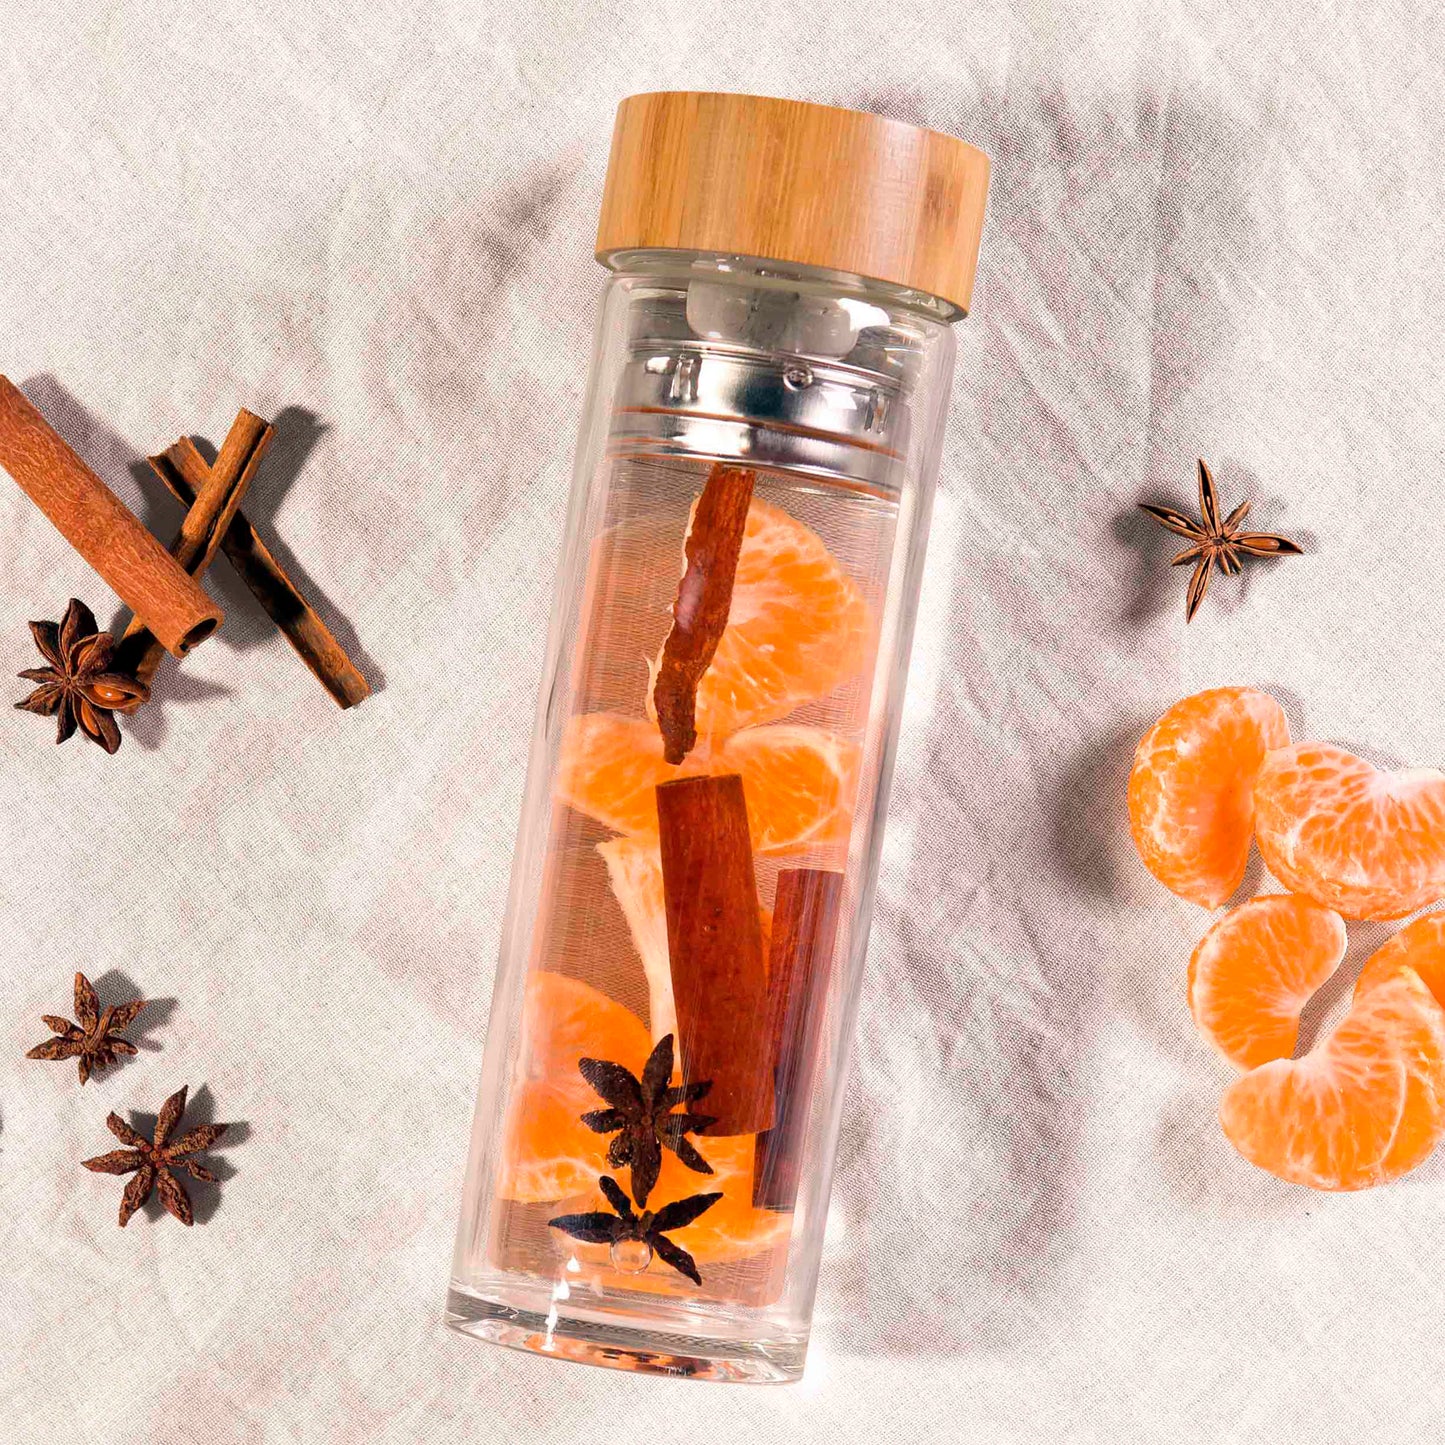 double walled glass drink flask filled with citrus and cinnamon to infuse the water